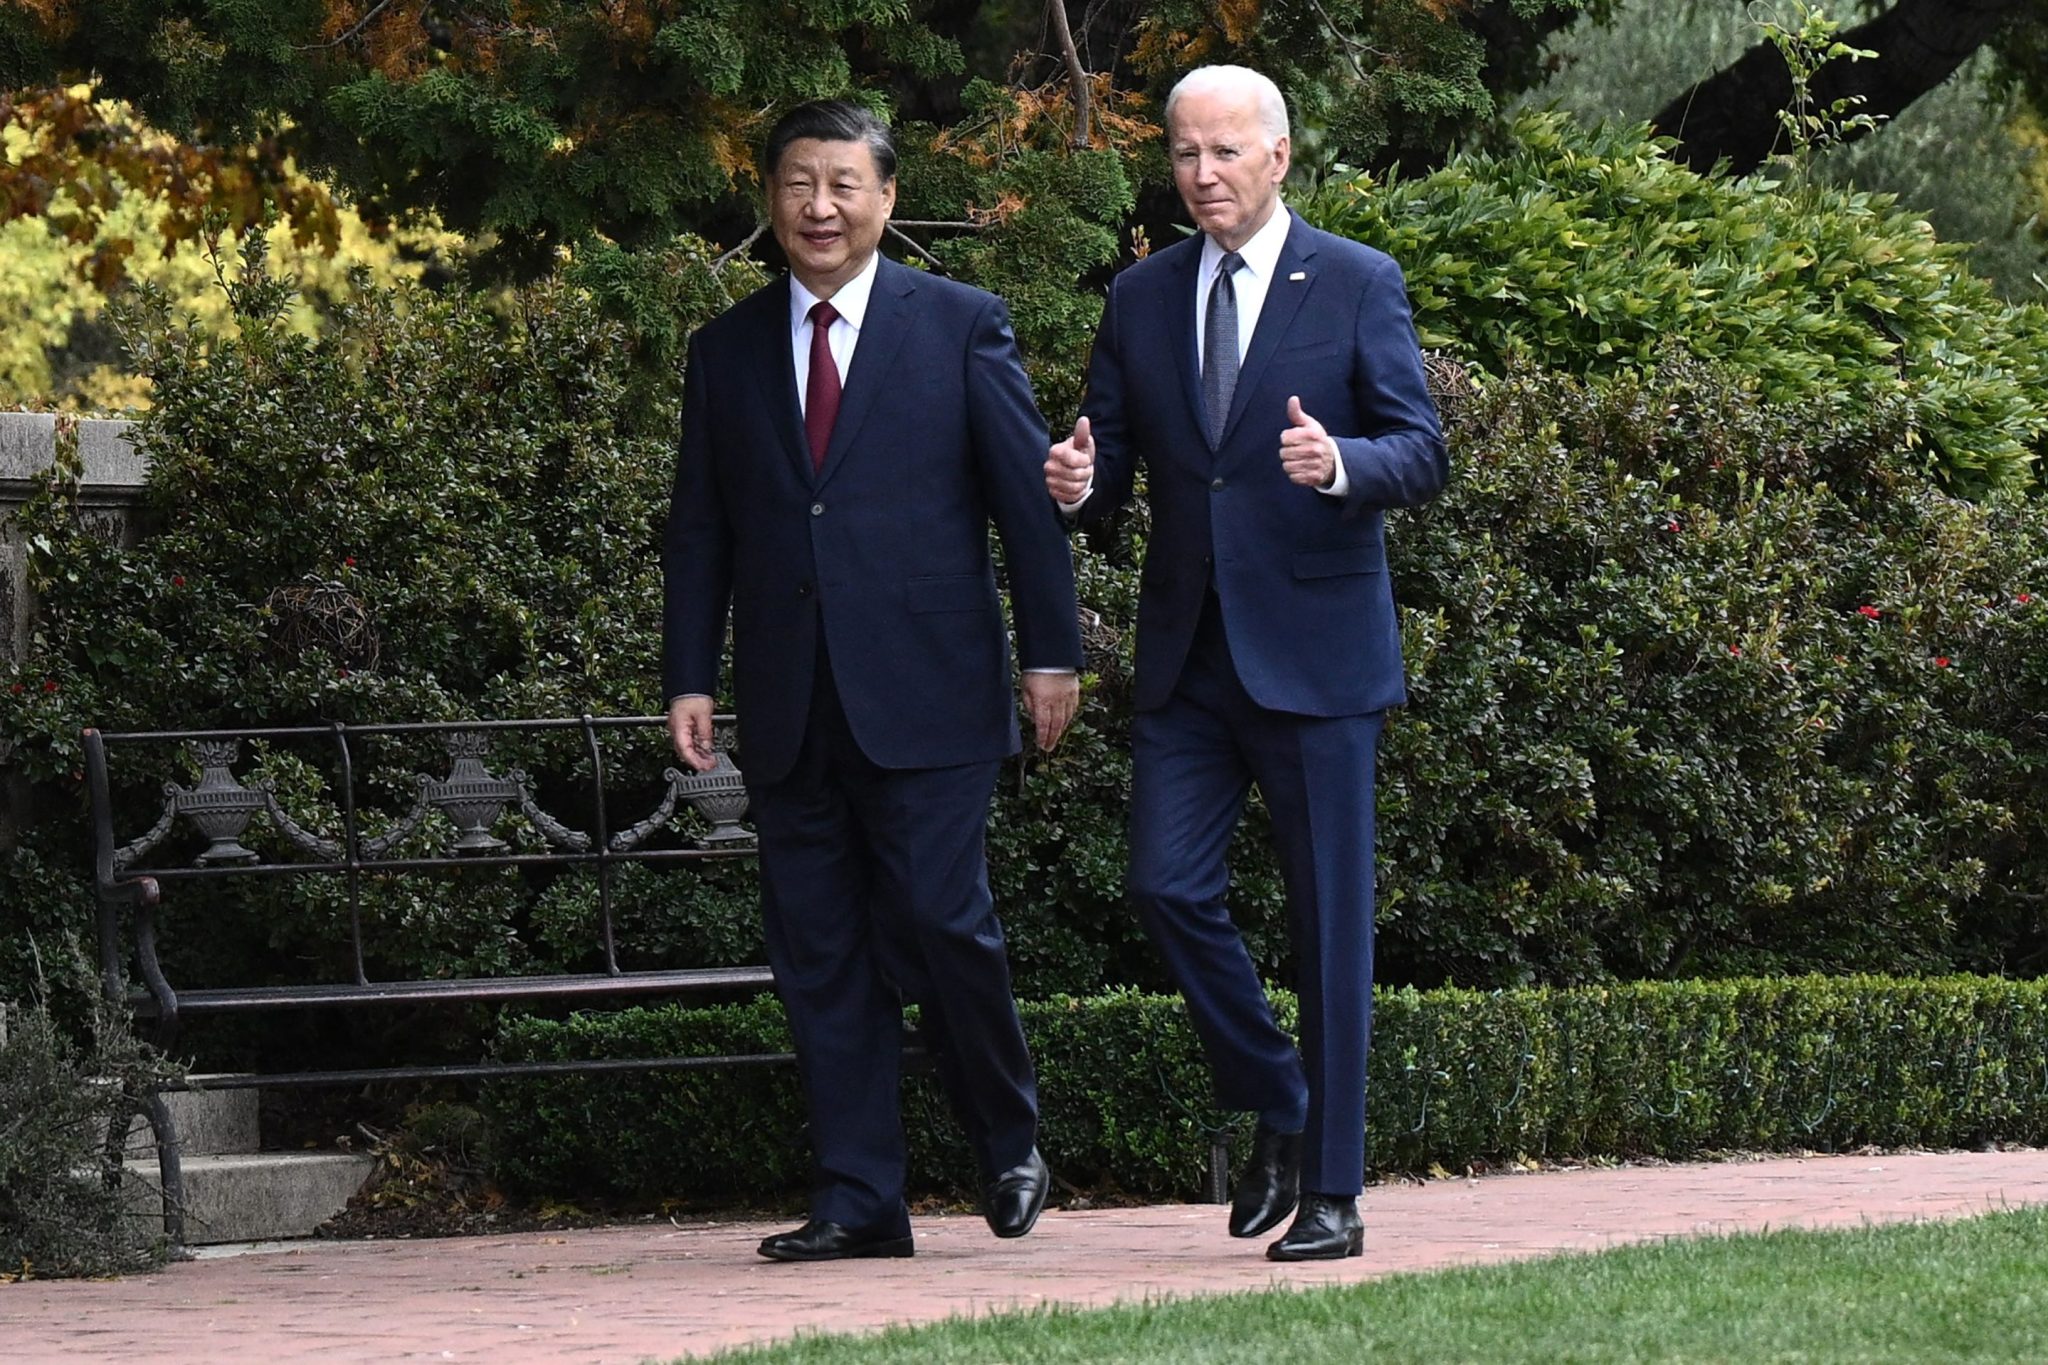 Biden and Xi agree to curb illicit fentanyl and restart military communications—but remain miles apart of many critical issues